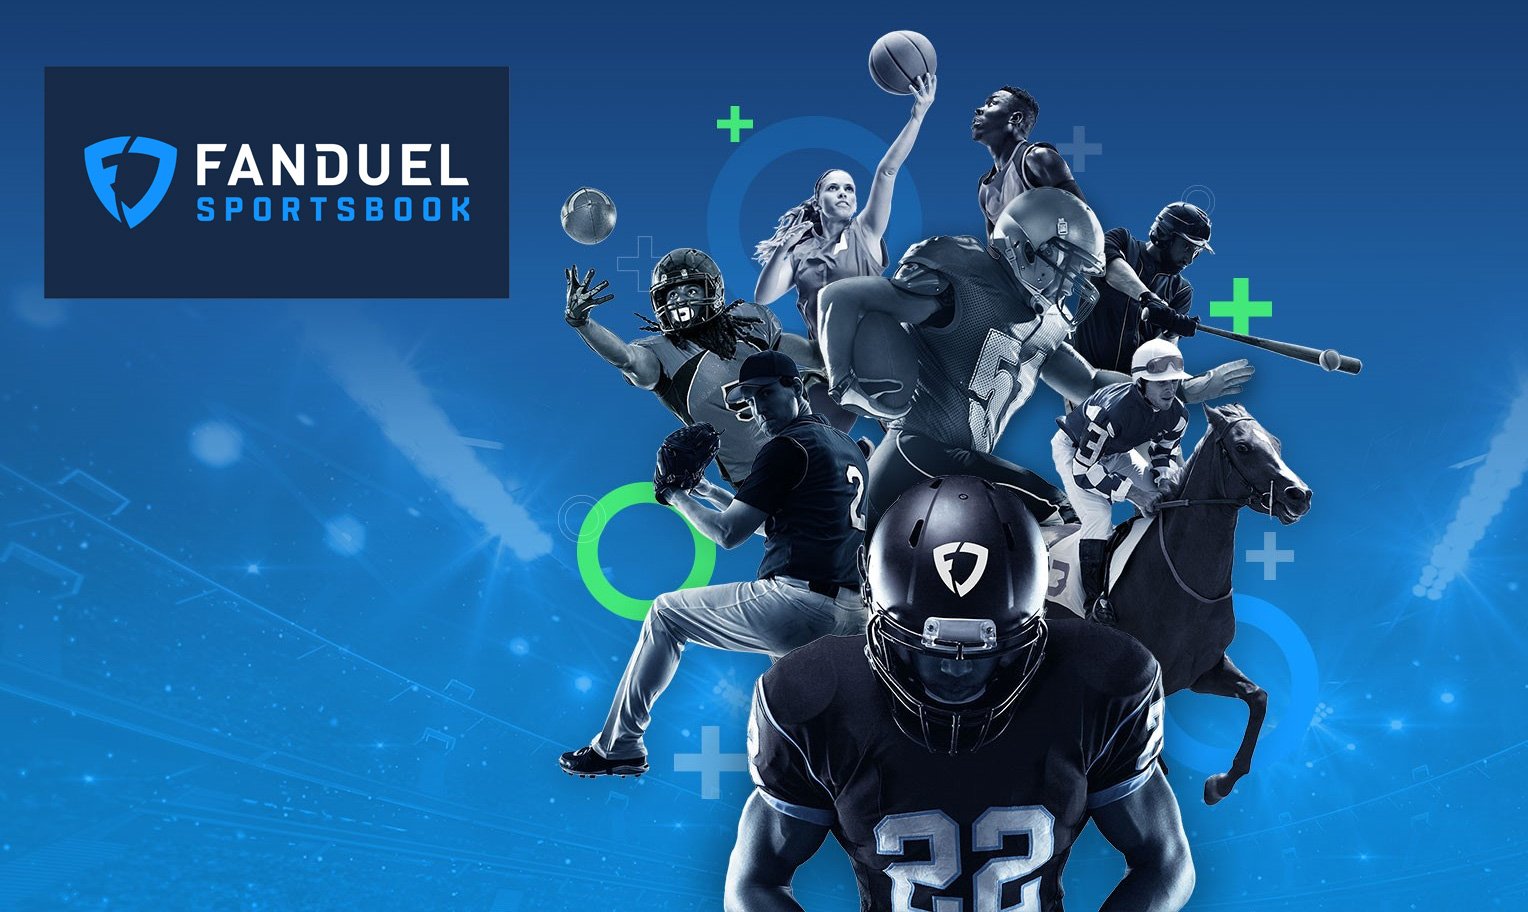 FanDuel: The Best And Most Trusted Since 2009